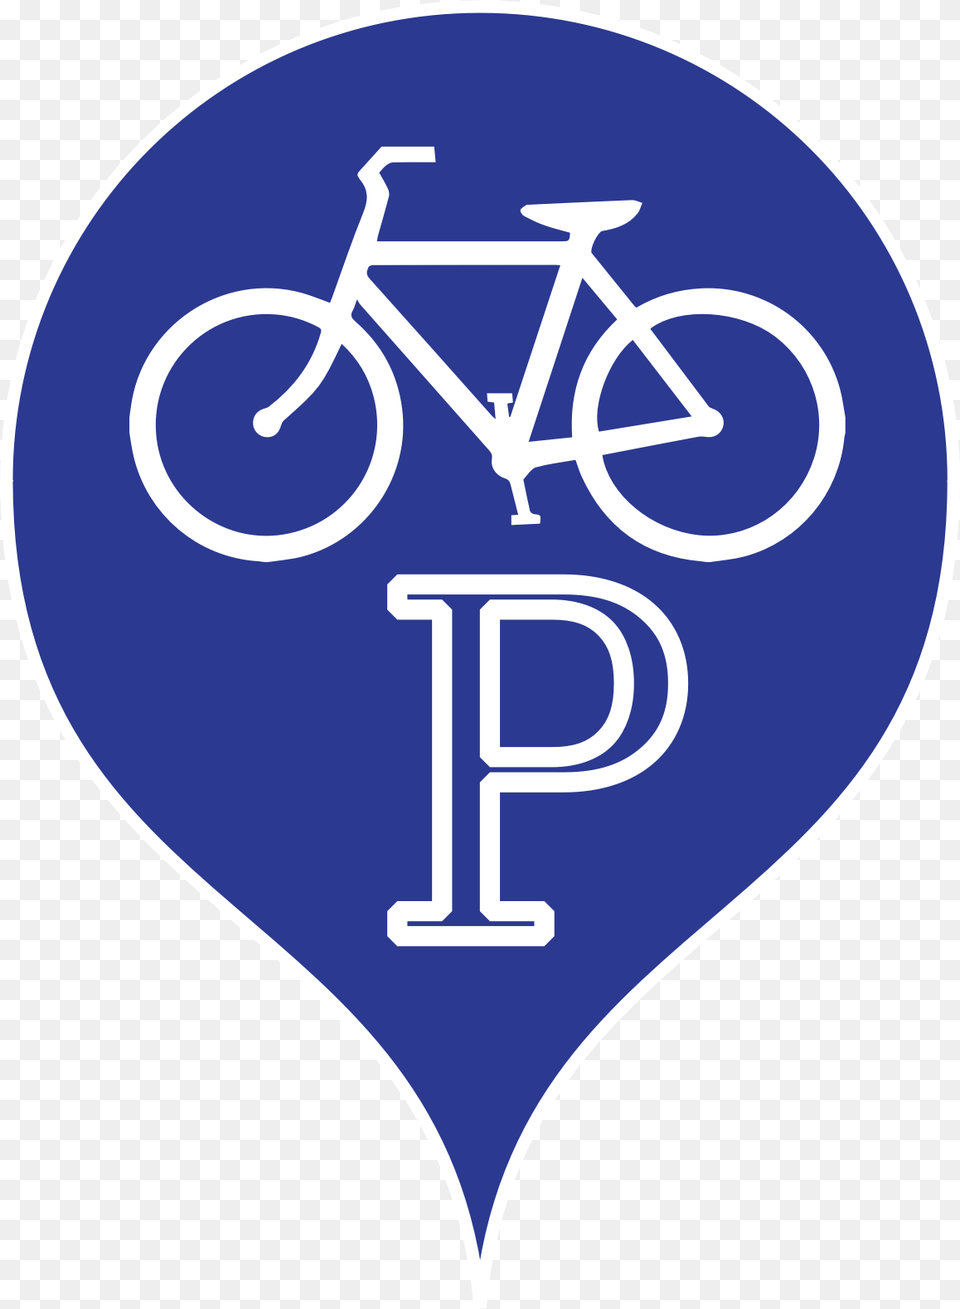 This Icons Design Of Bike Parking Sign, Light, Symbol Free Png